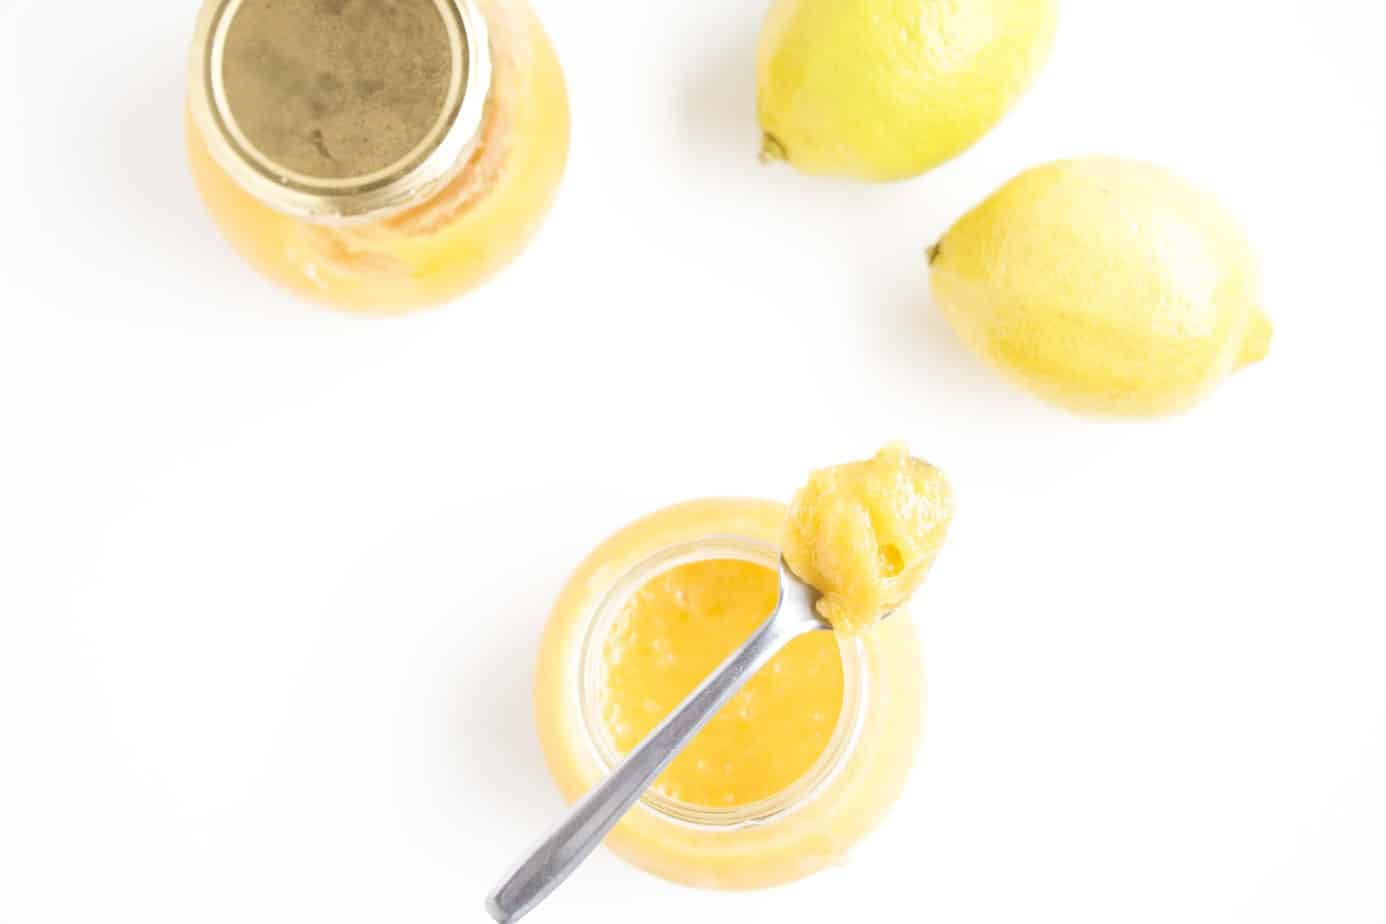 Jars of lemon curd with a spoonful of curd on a teaspoon resting on top of the one jar.